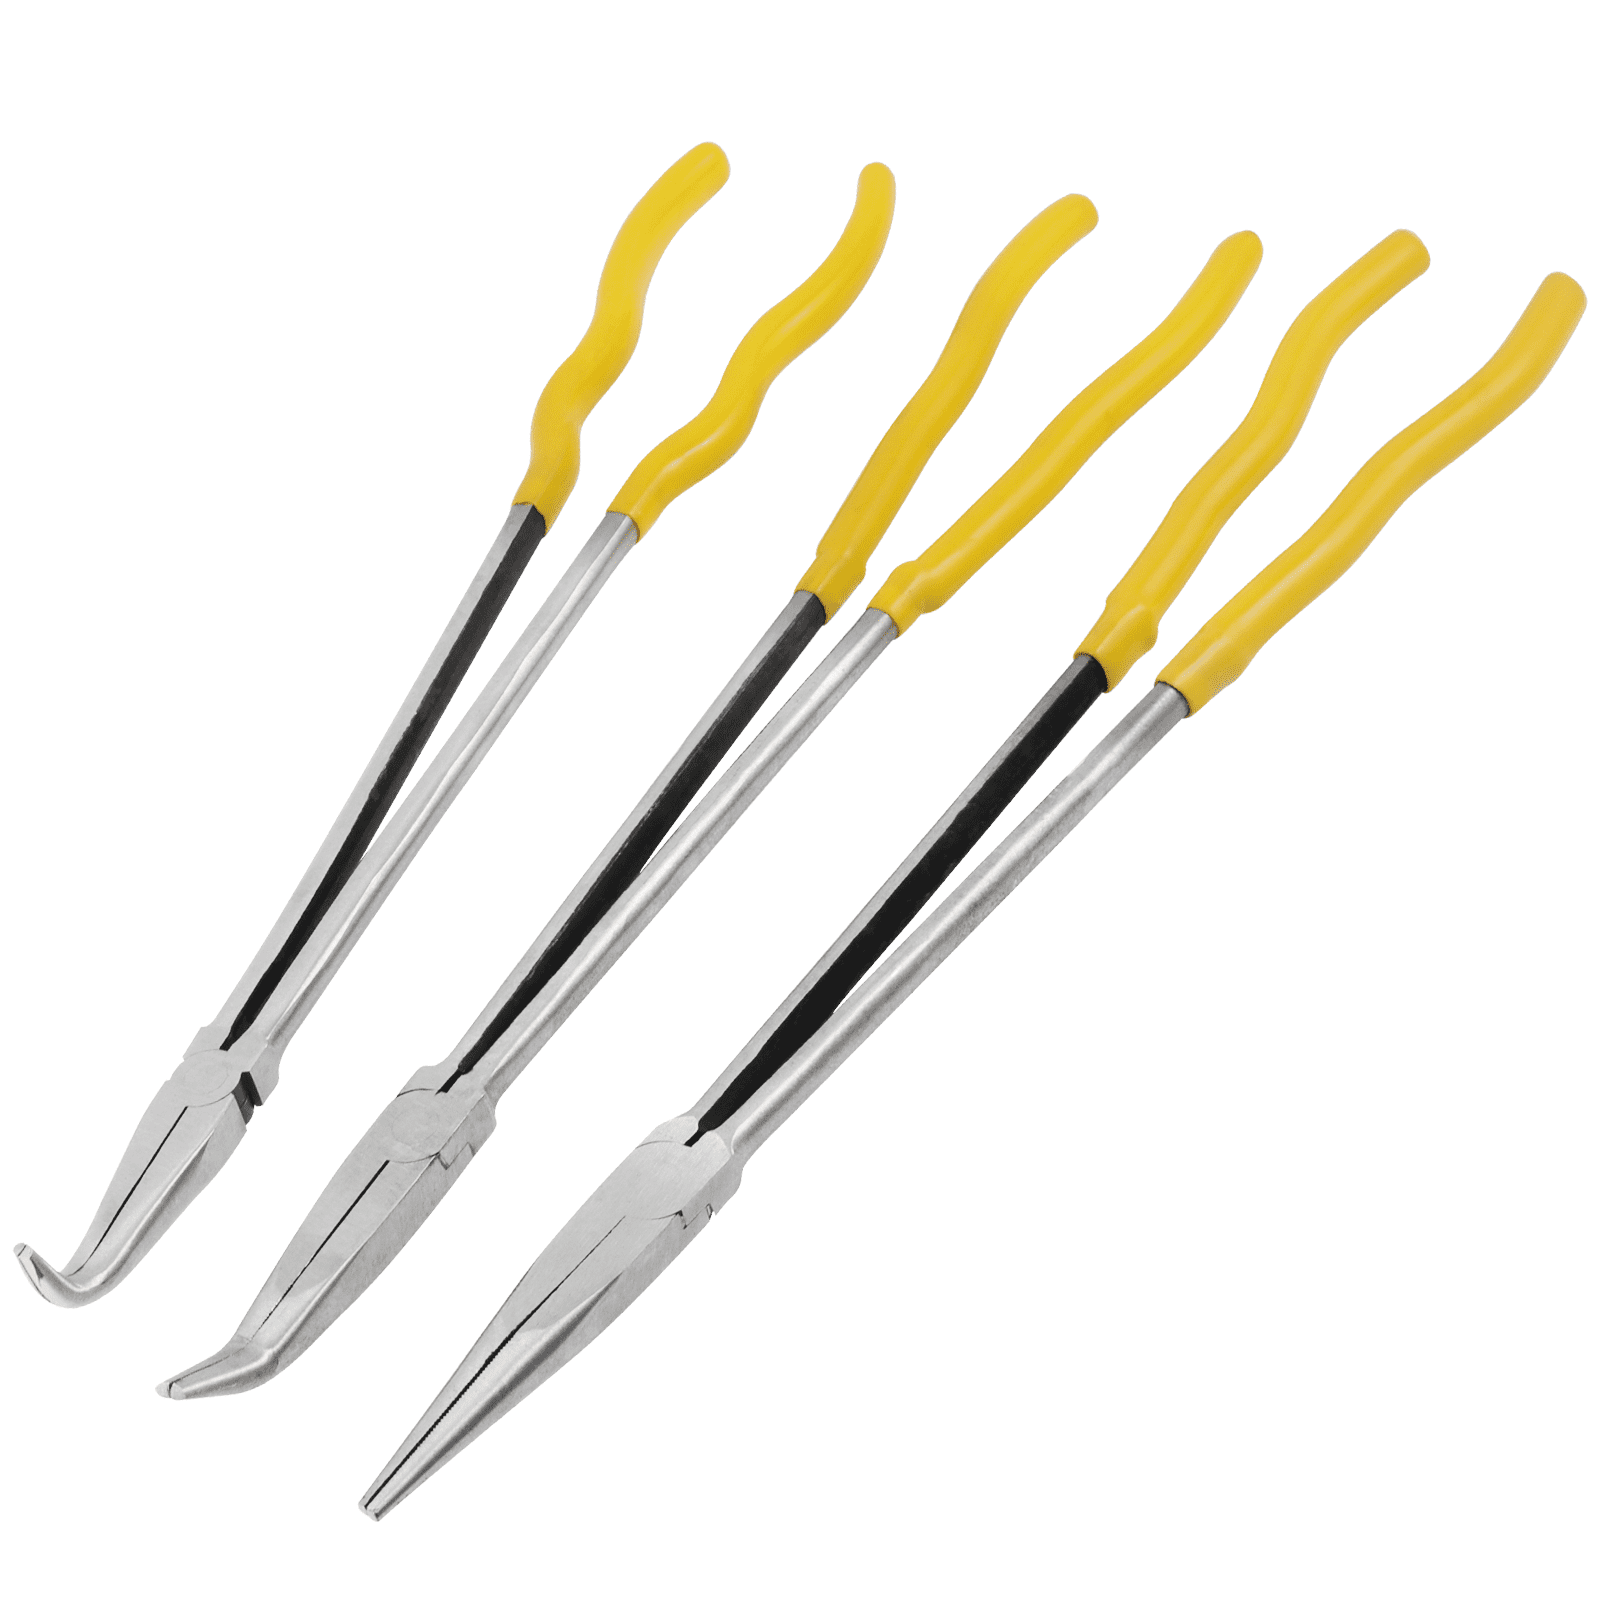 K Tool 51103 Needle Nose Pliers Set, 3 Piece, 11 Long, with Straight, 45  Degree and 90 Degree, in Pouch